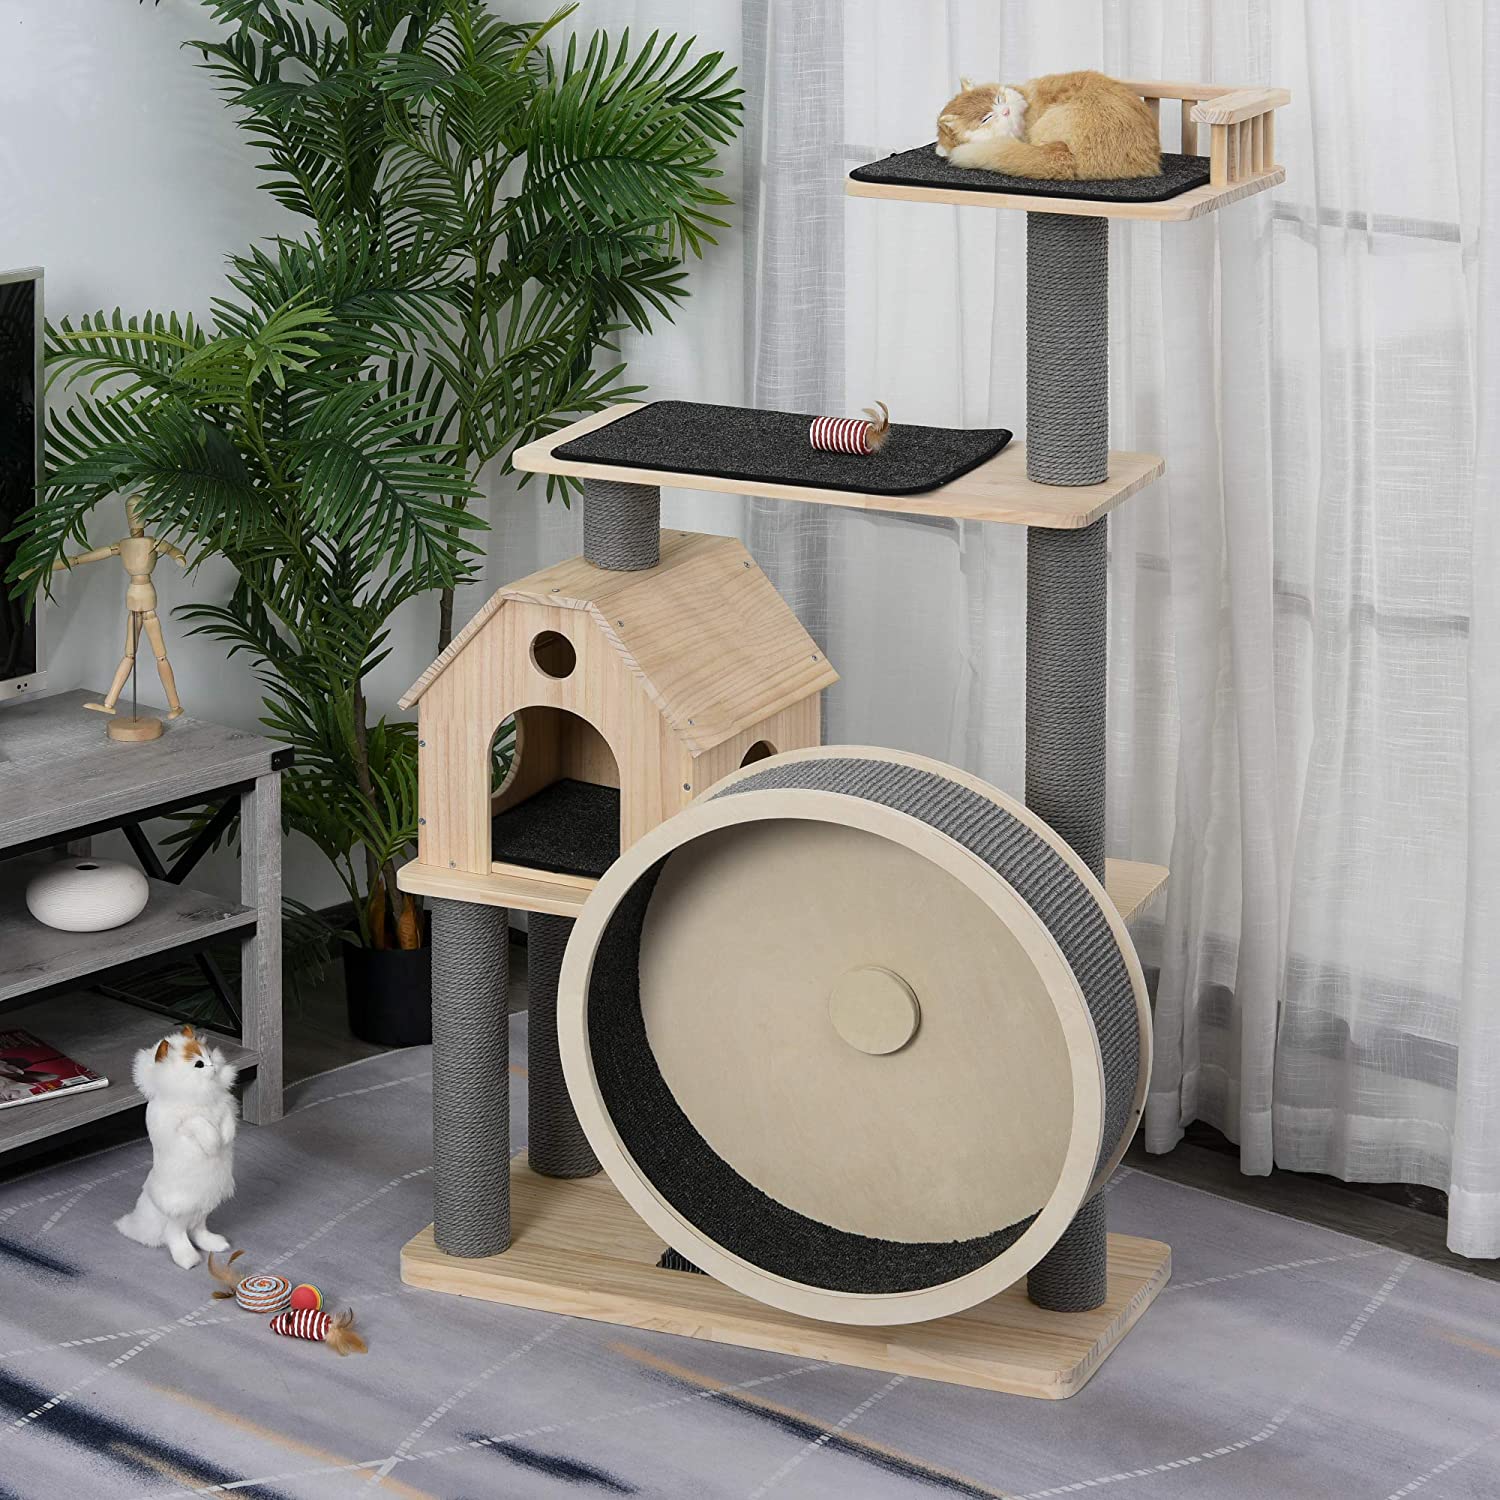 Cat Tower With Running Wheel - Cat tree with hamster wheel